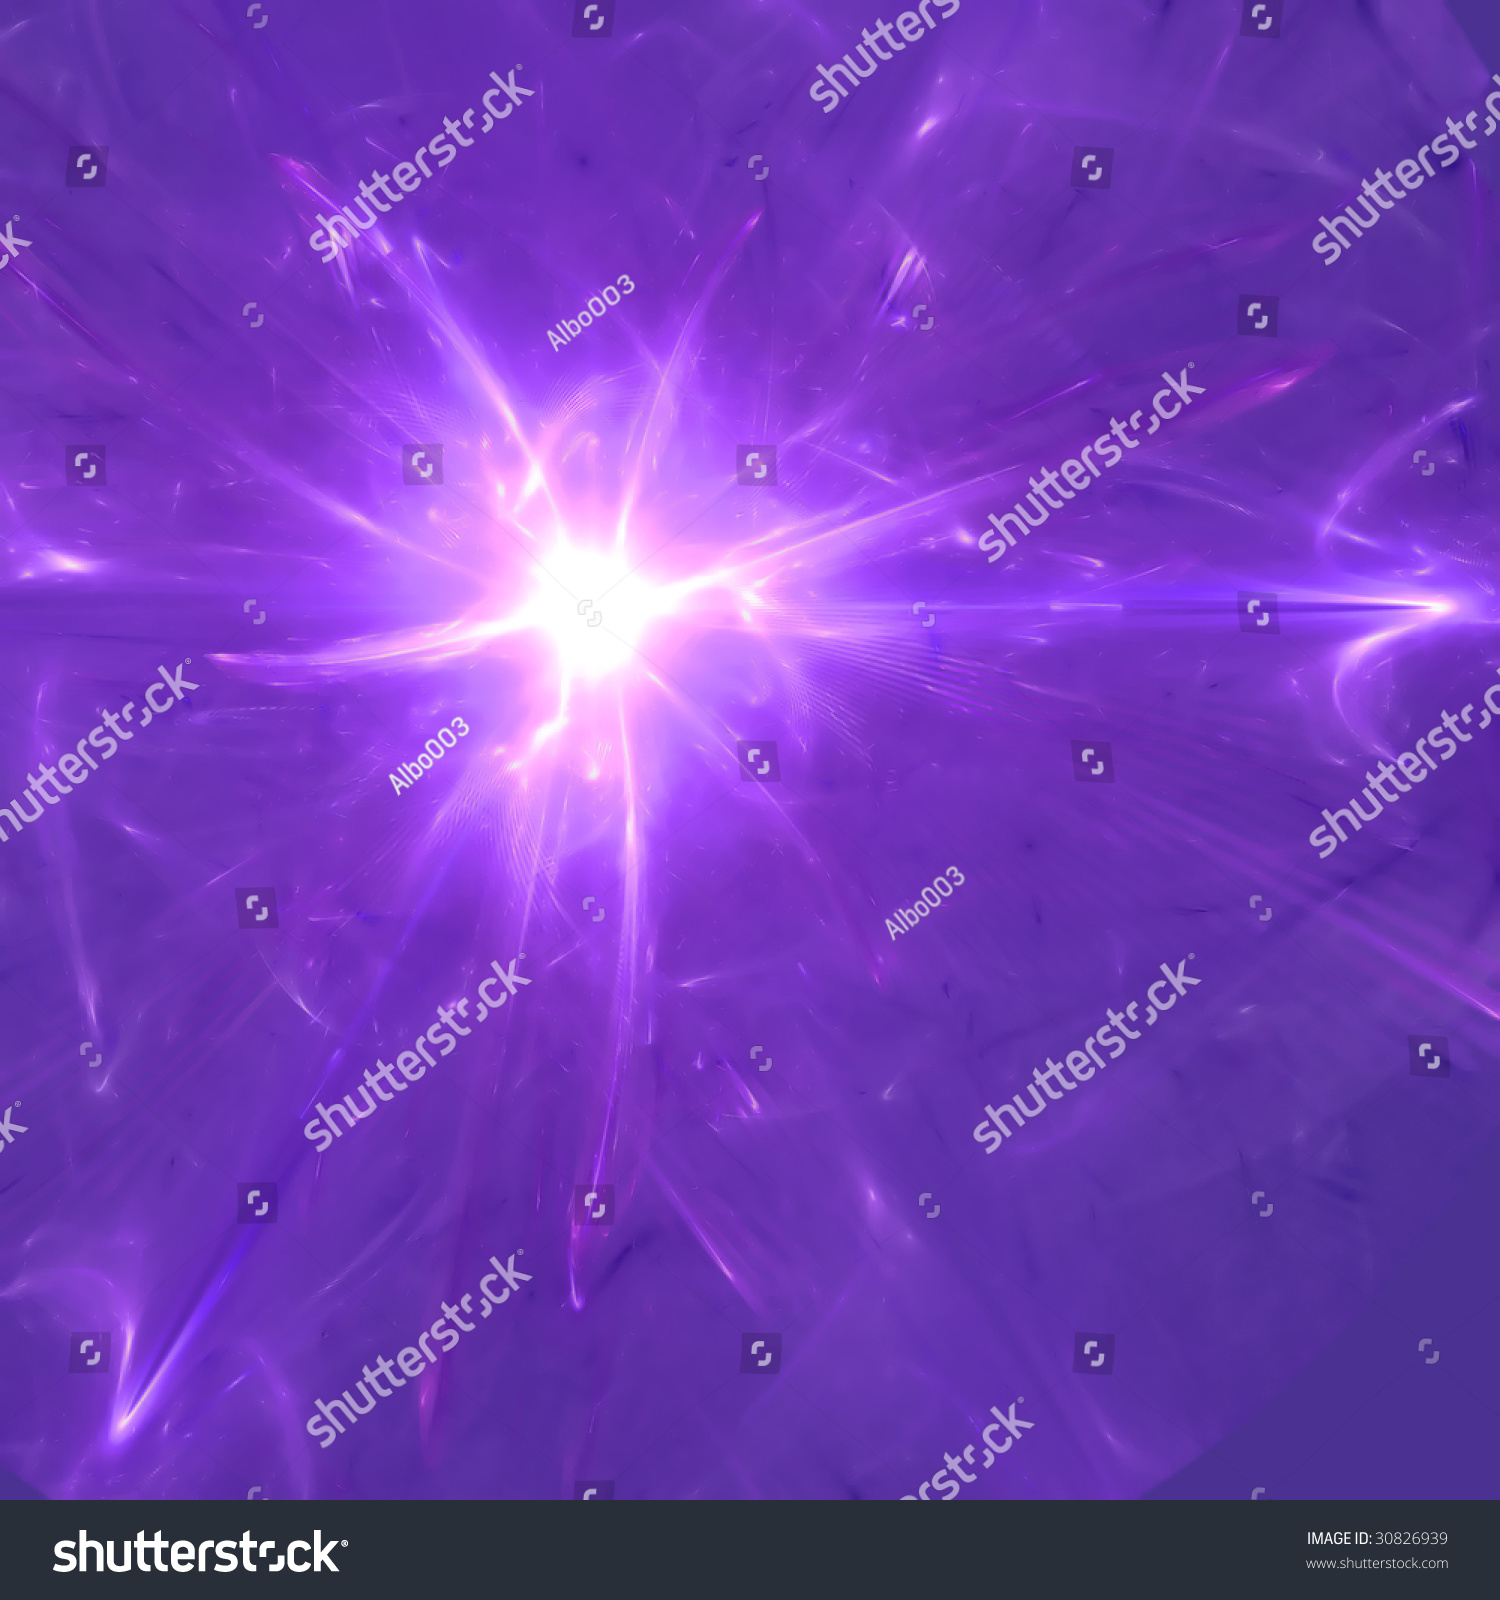 Abstract background. Purple - white palette. Raster fractal graphics. #30826939